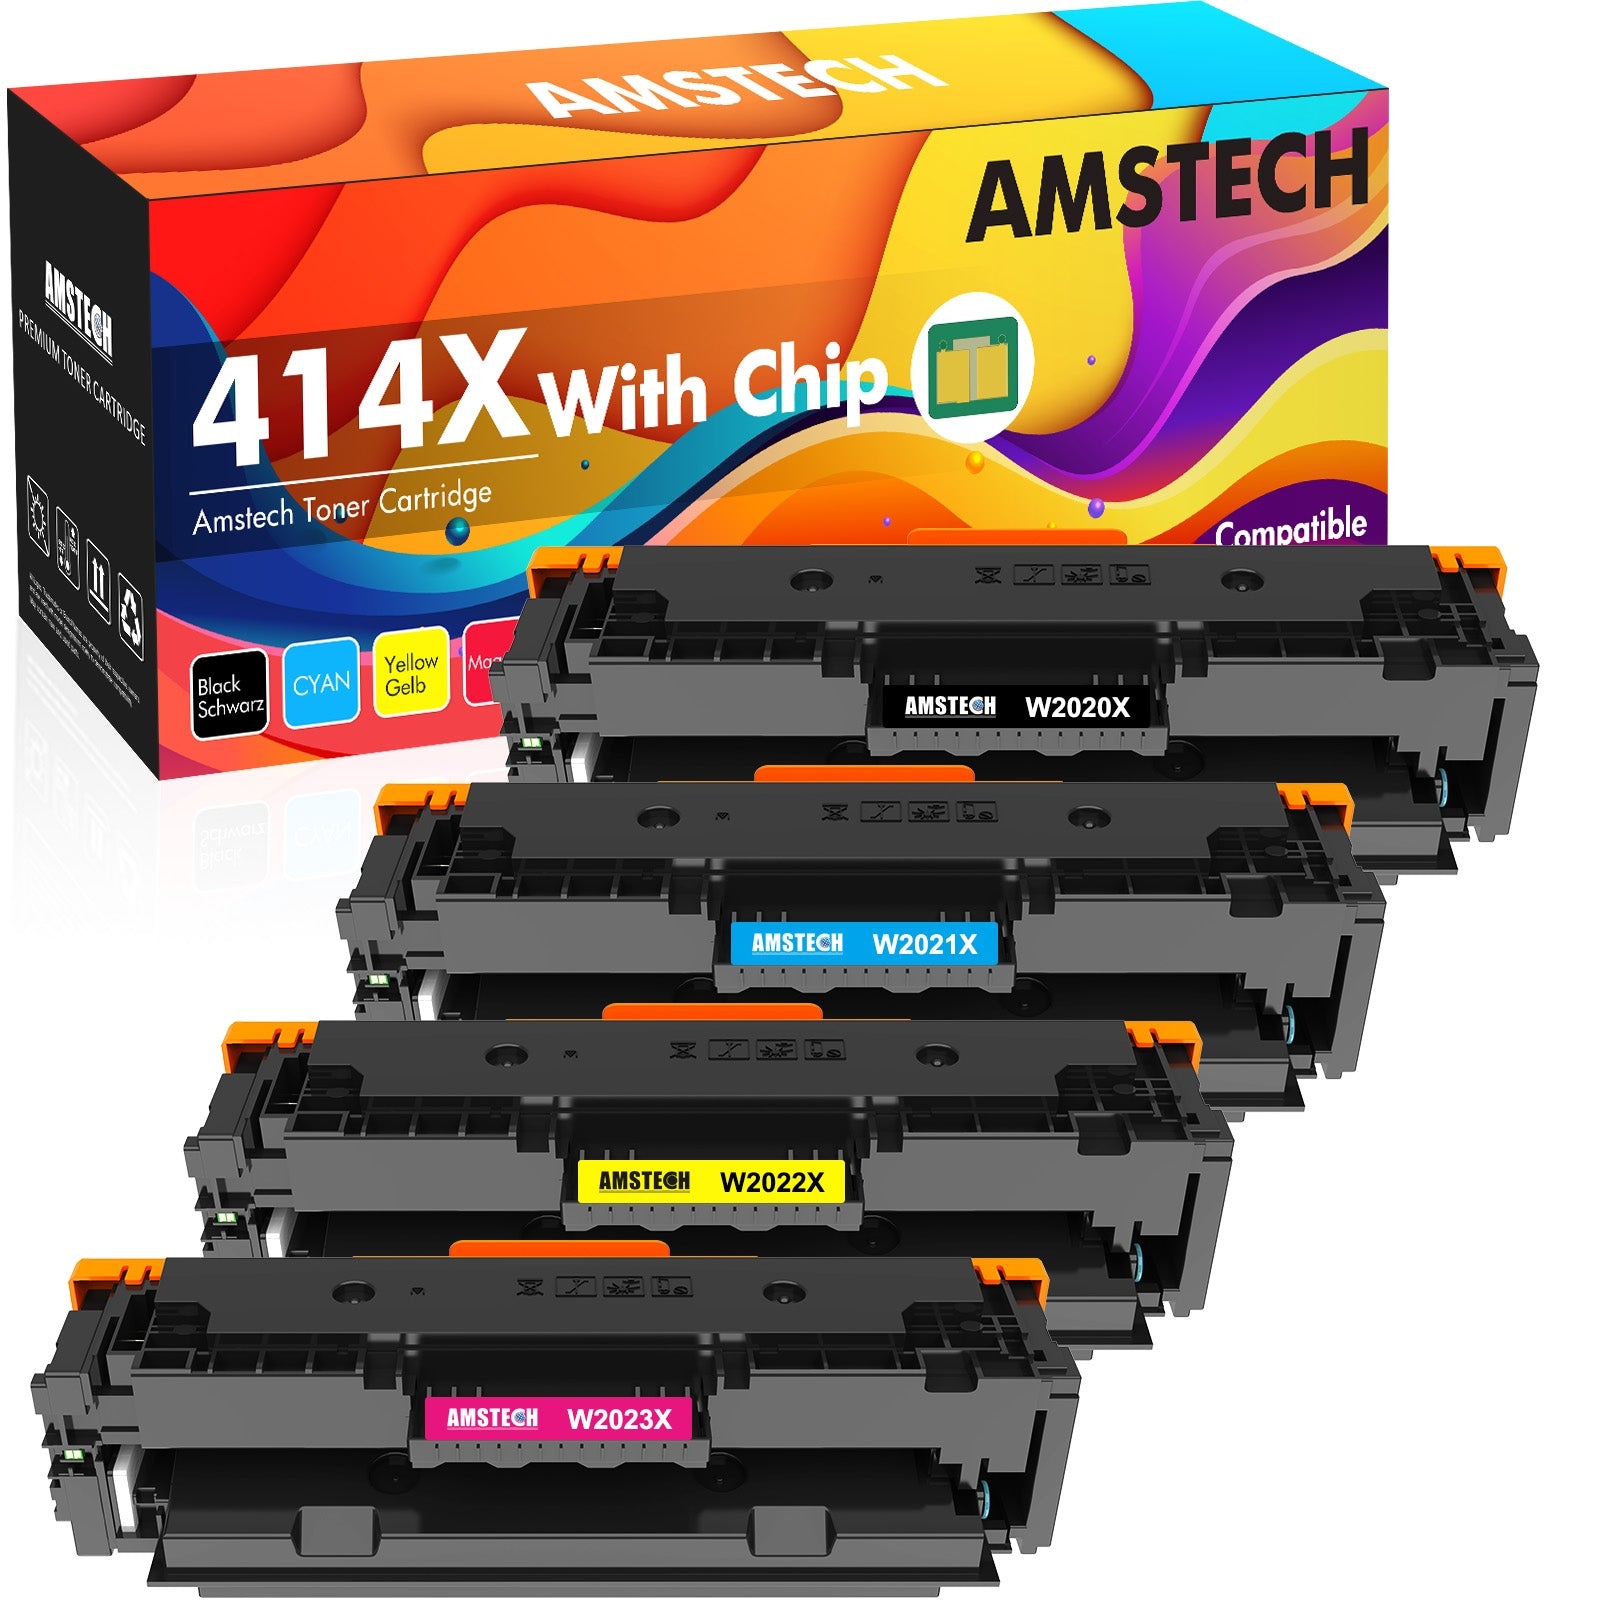 (with Chip) 414X 414A Toner Cartridge 4-Pack High Yield Compatible Replacement for 414A 414X Color Pro MFP M479fdw M454dw M479fdn M454dn M454 M479 Printer Ink (Black Cyan Magenta Yellow)